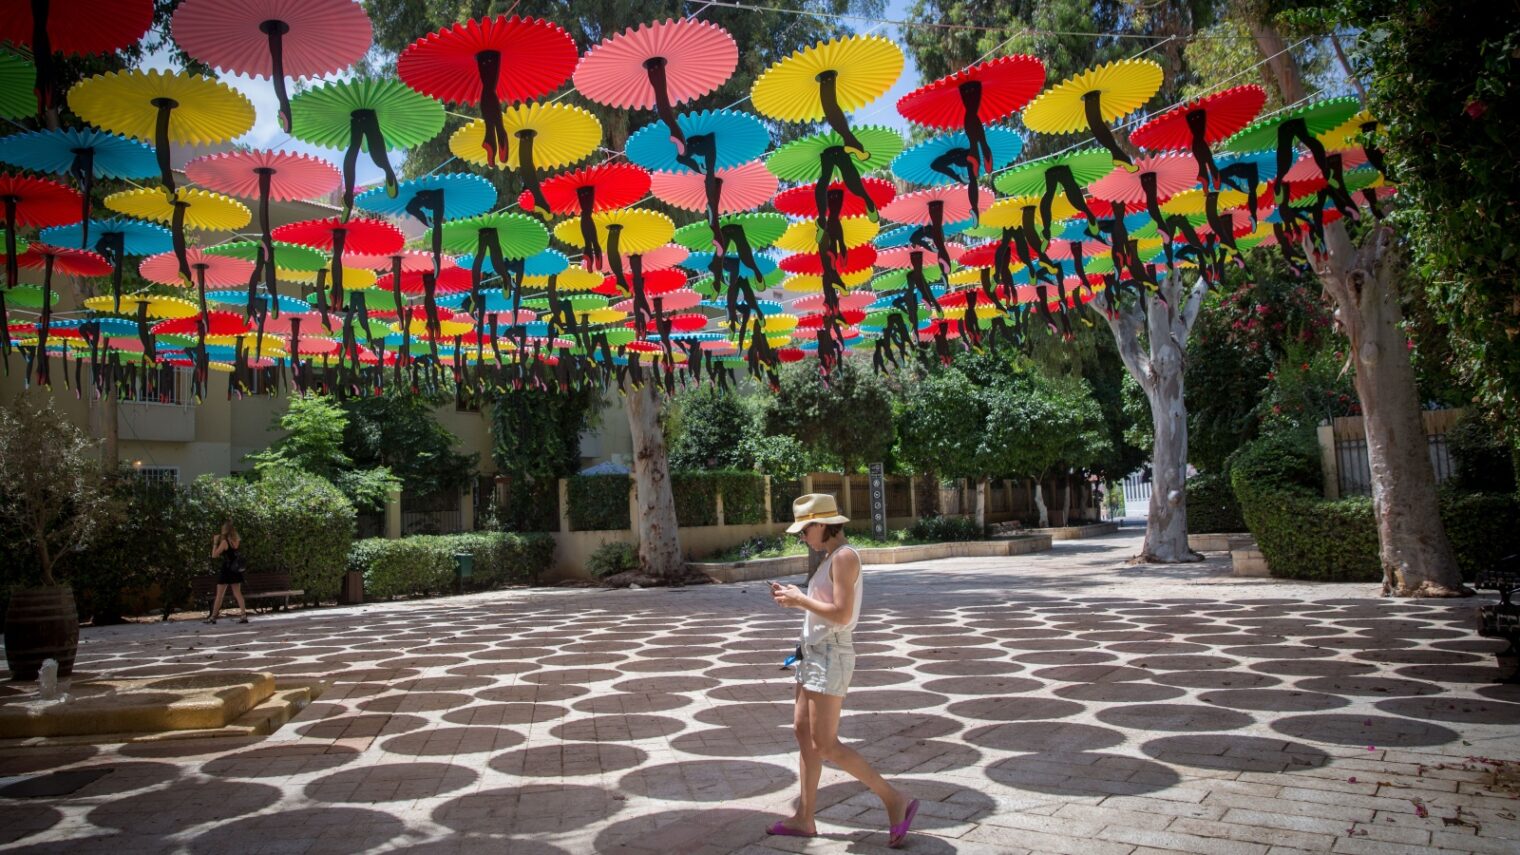 Wear light-colored, lightweight clothing and a hat, and find yourself some shade in the Israeli summer. This photo was taken outside the Suzanne Dellal Center in Tel Aviv. Photo by Miriam Alster/FLASH90